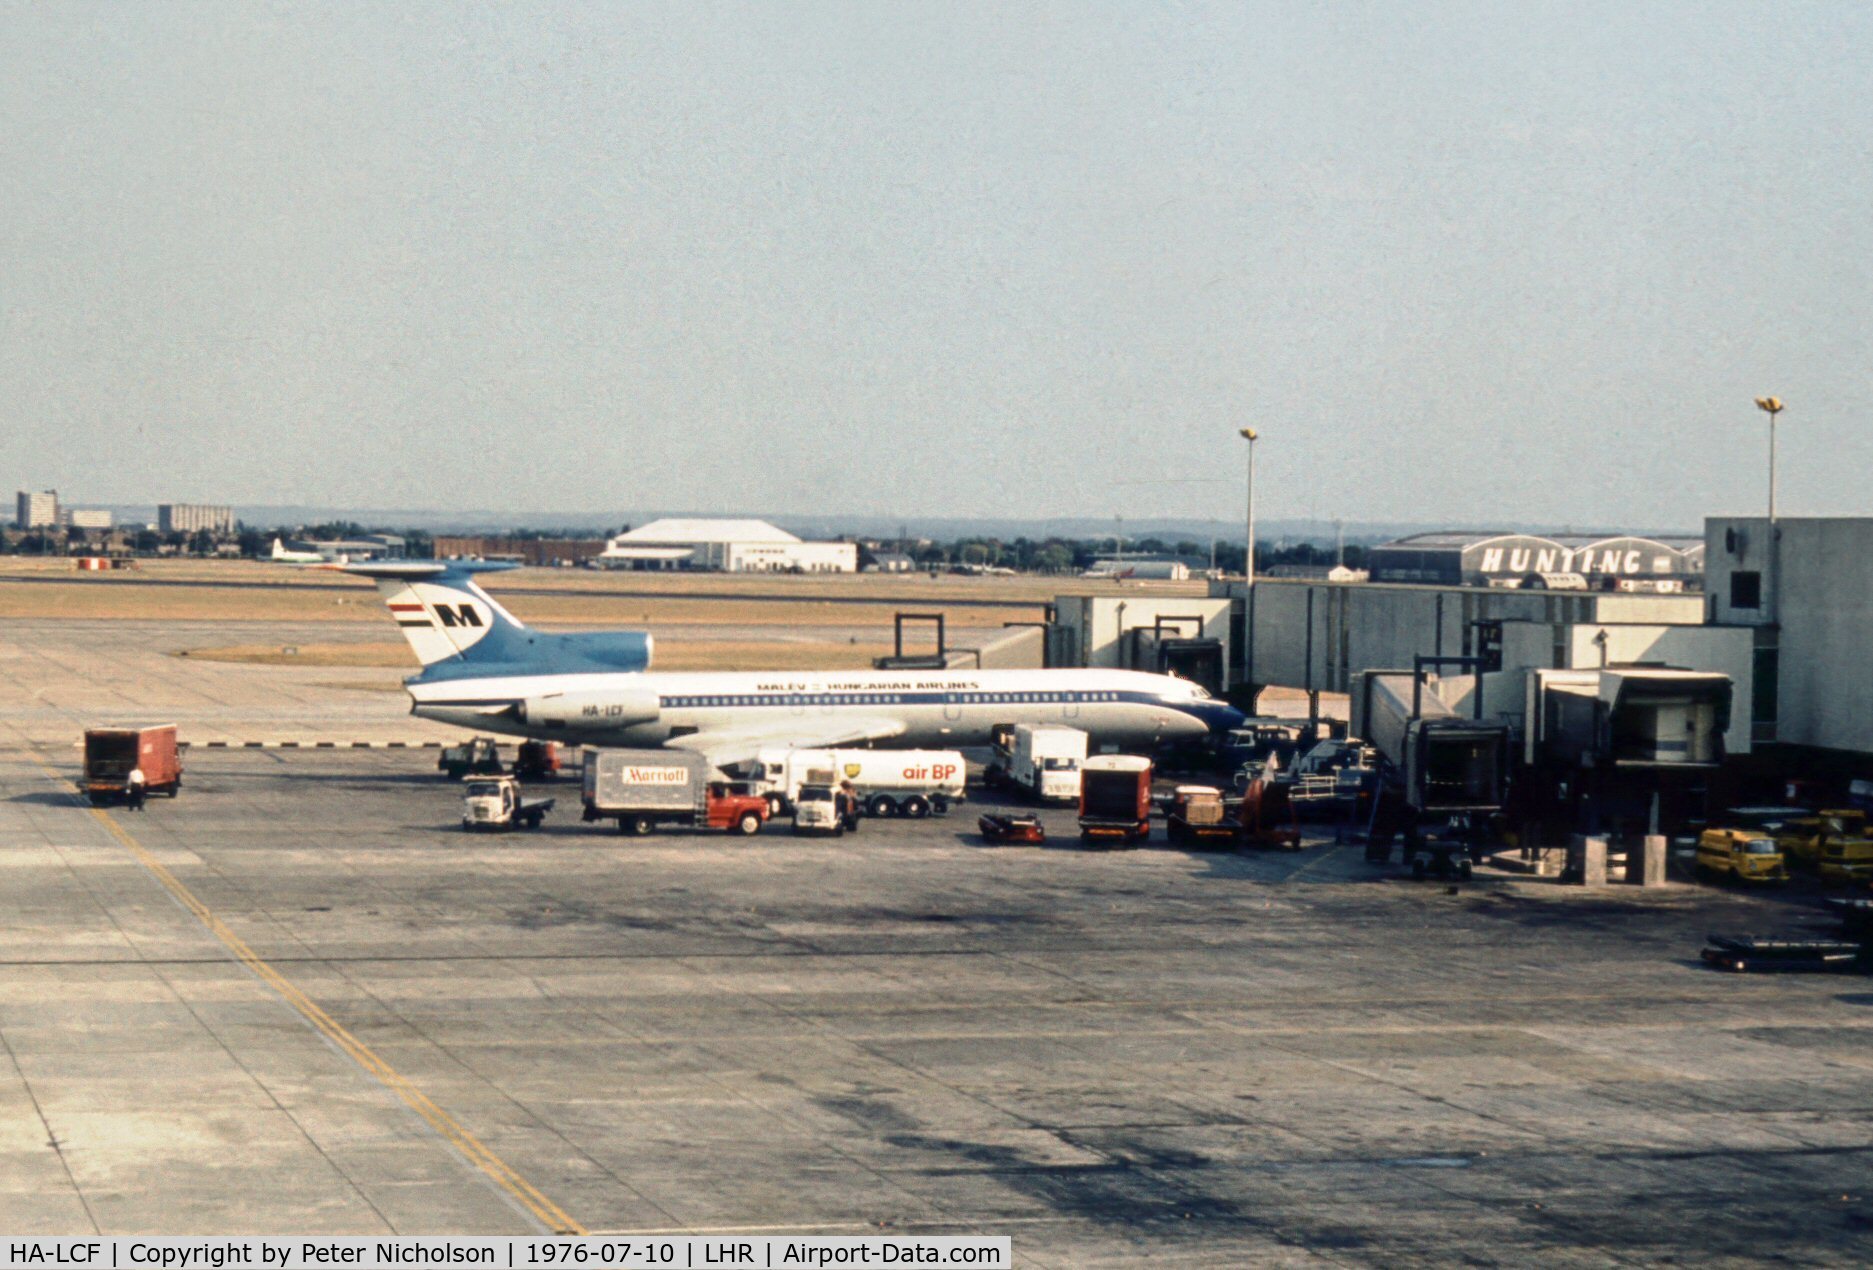 HA-LCF, 1975 Tupolev Tu-154B C/N 75A126, Tu-154B Careless of Malev Hungarian Airlines at the terminal of London Heathrow in the Summer of 1976.